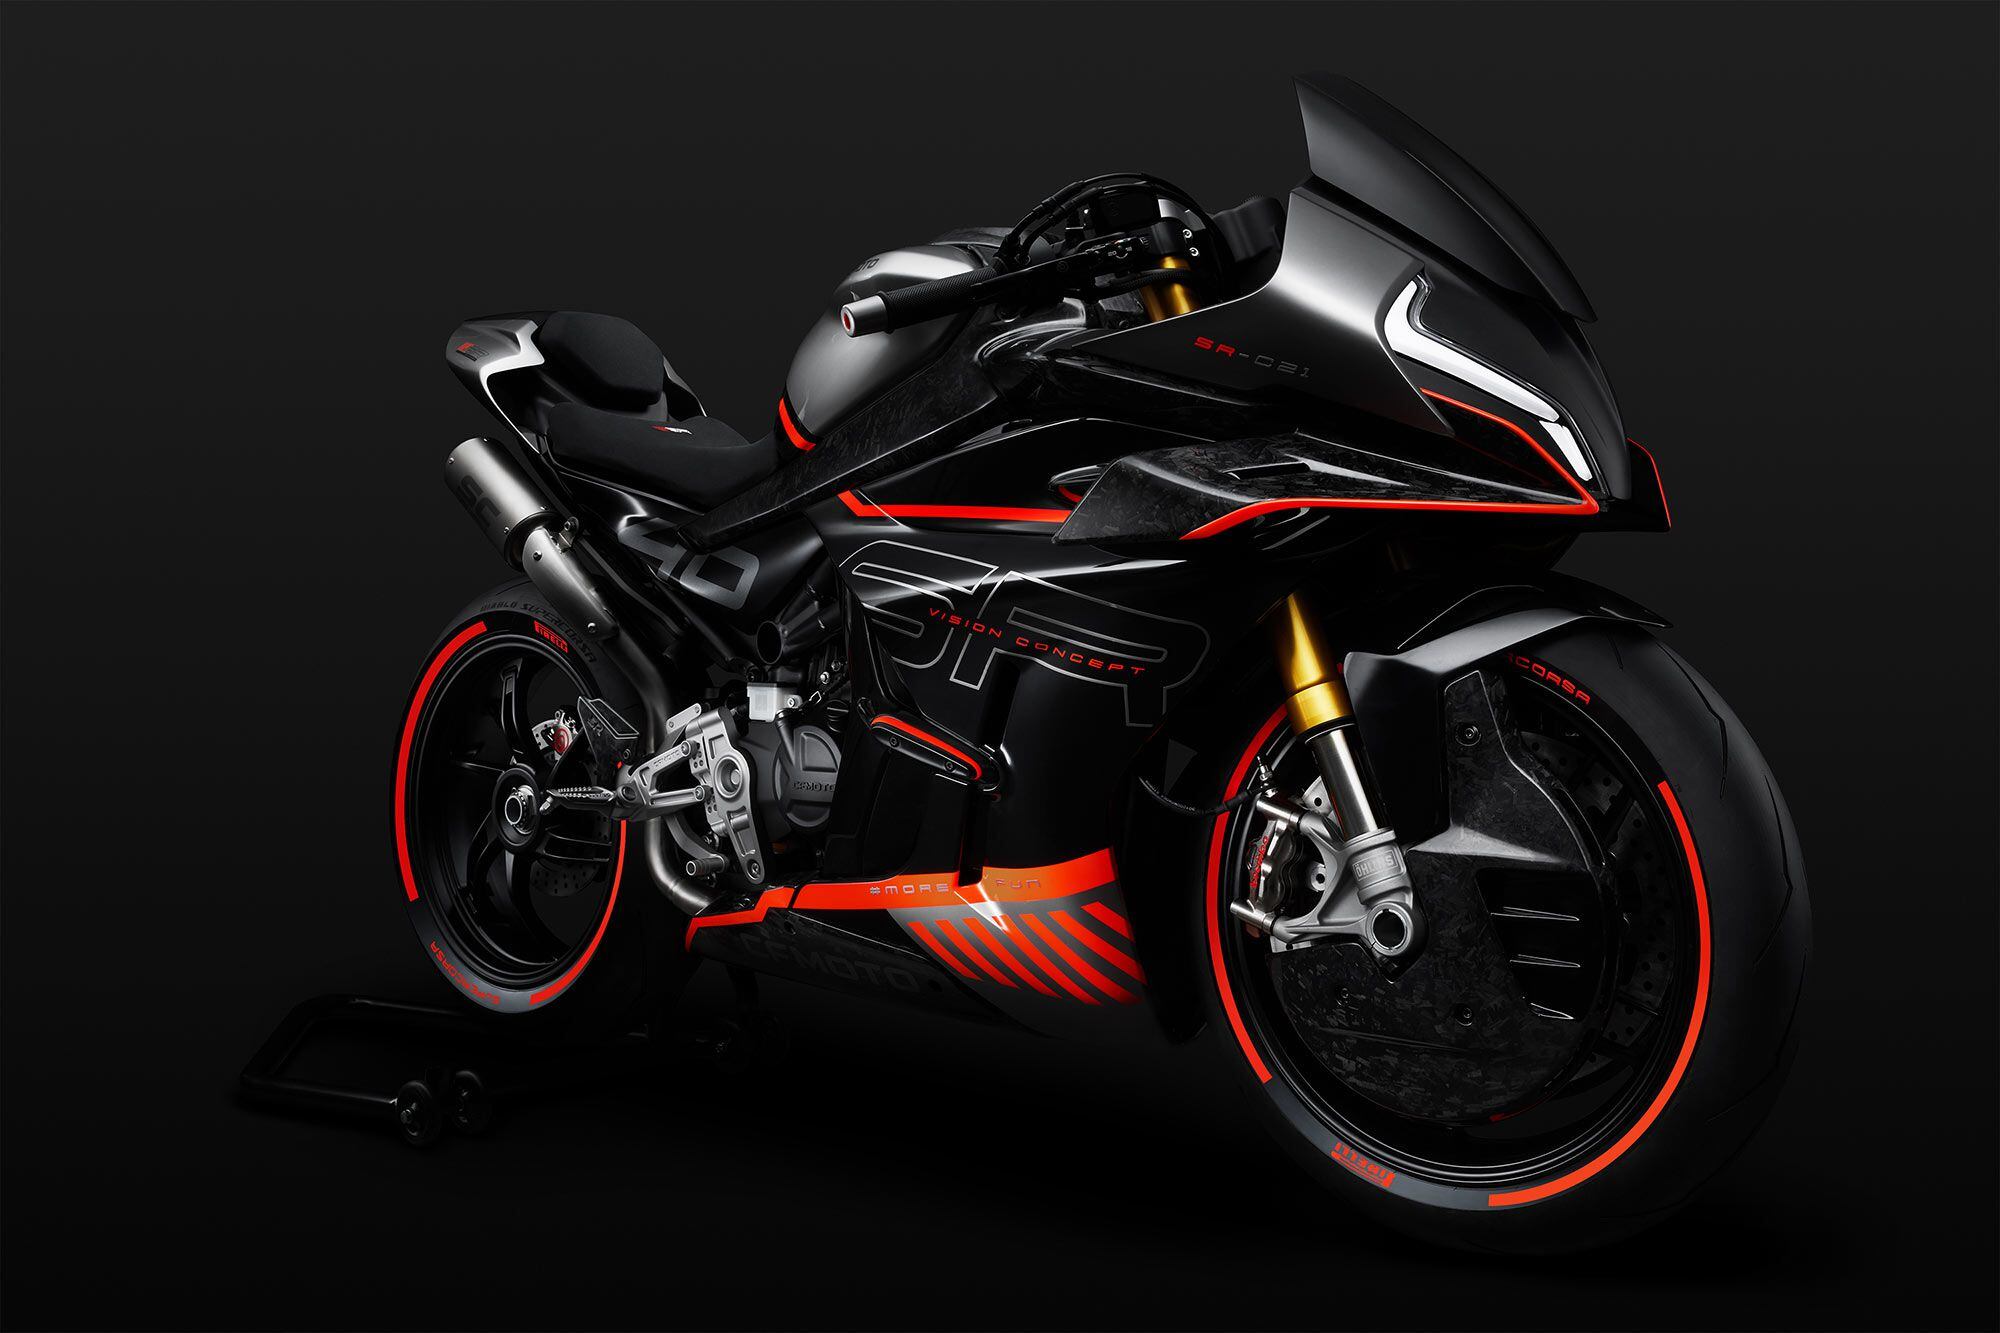 CFMoto’s SR SR-C21 concept has been shown in China and looks very much like a production-ready bike.